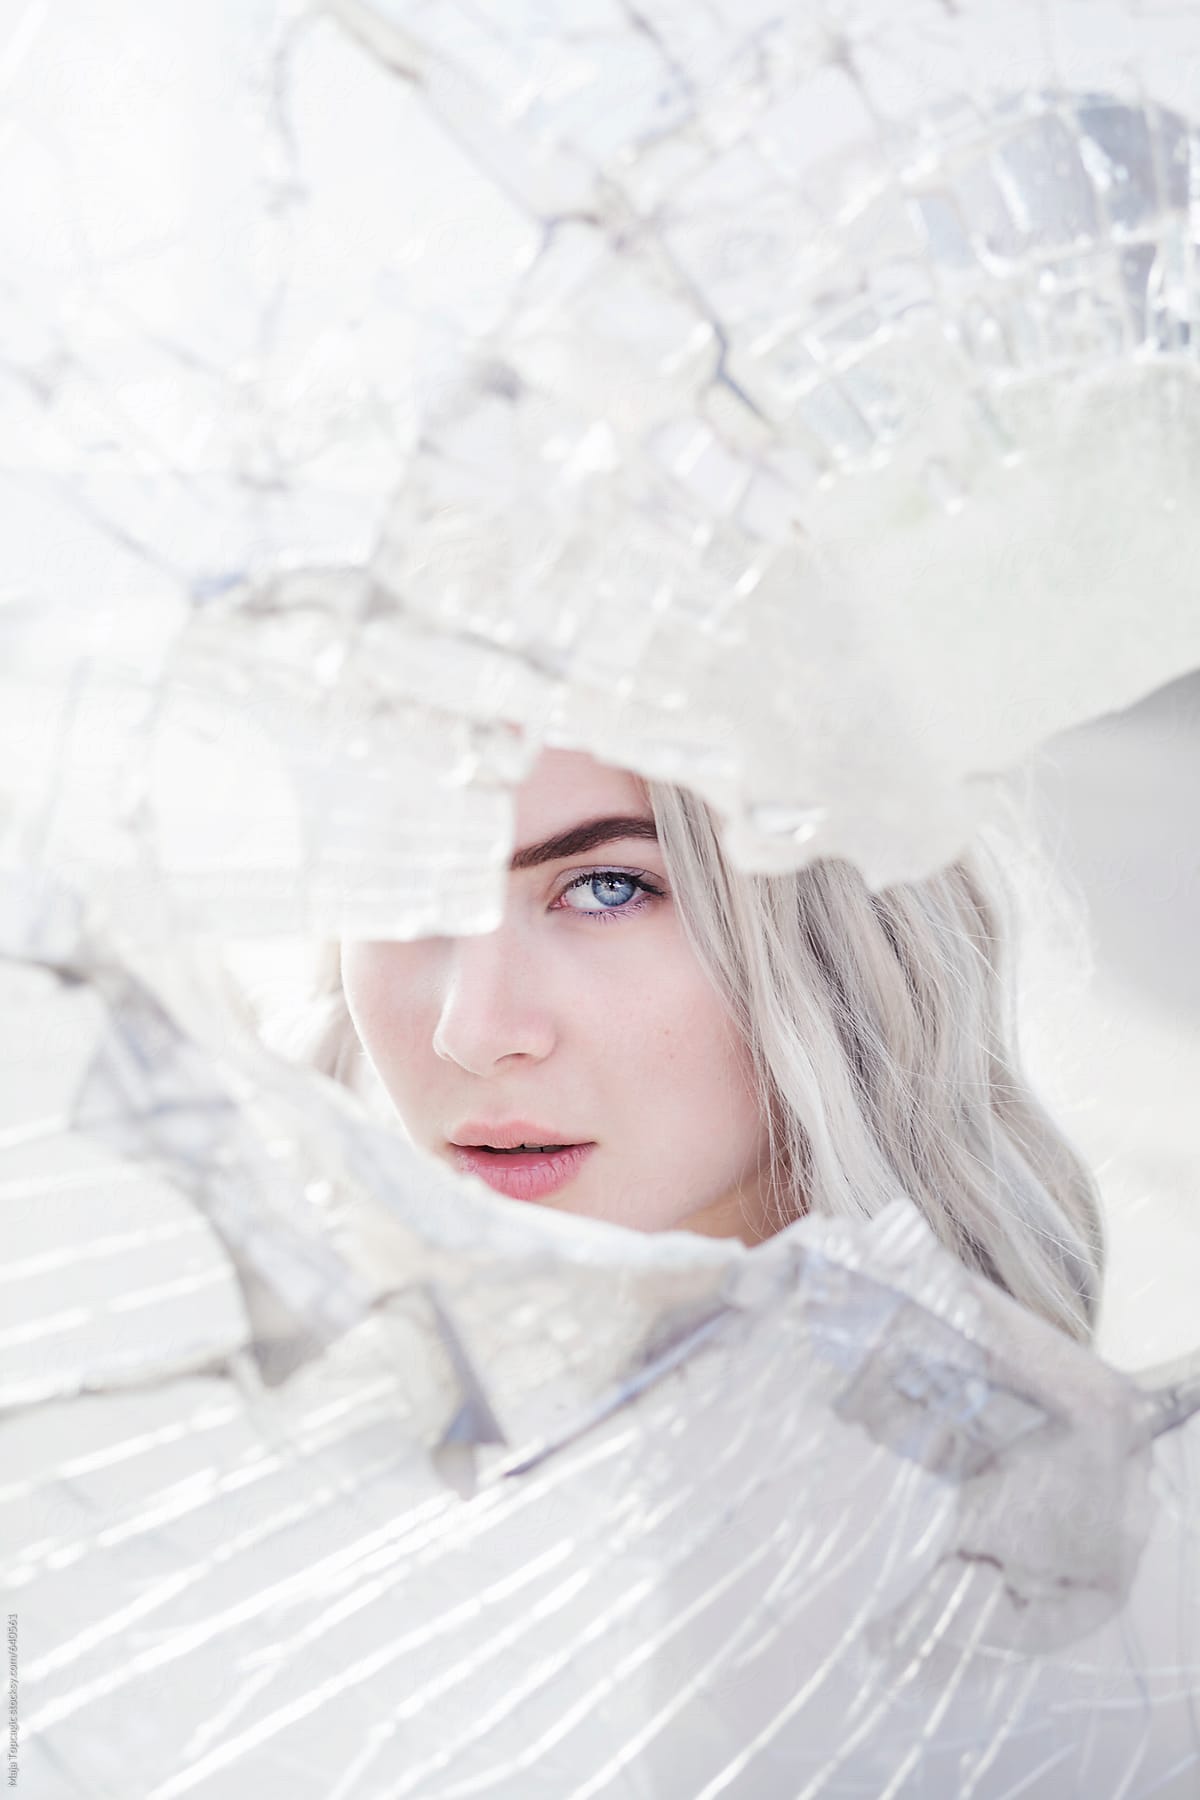 Young Beautiful Woman With Grey Hair And Blue Eyes Looking Through